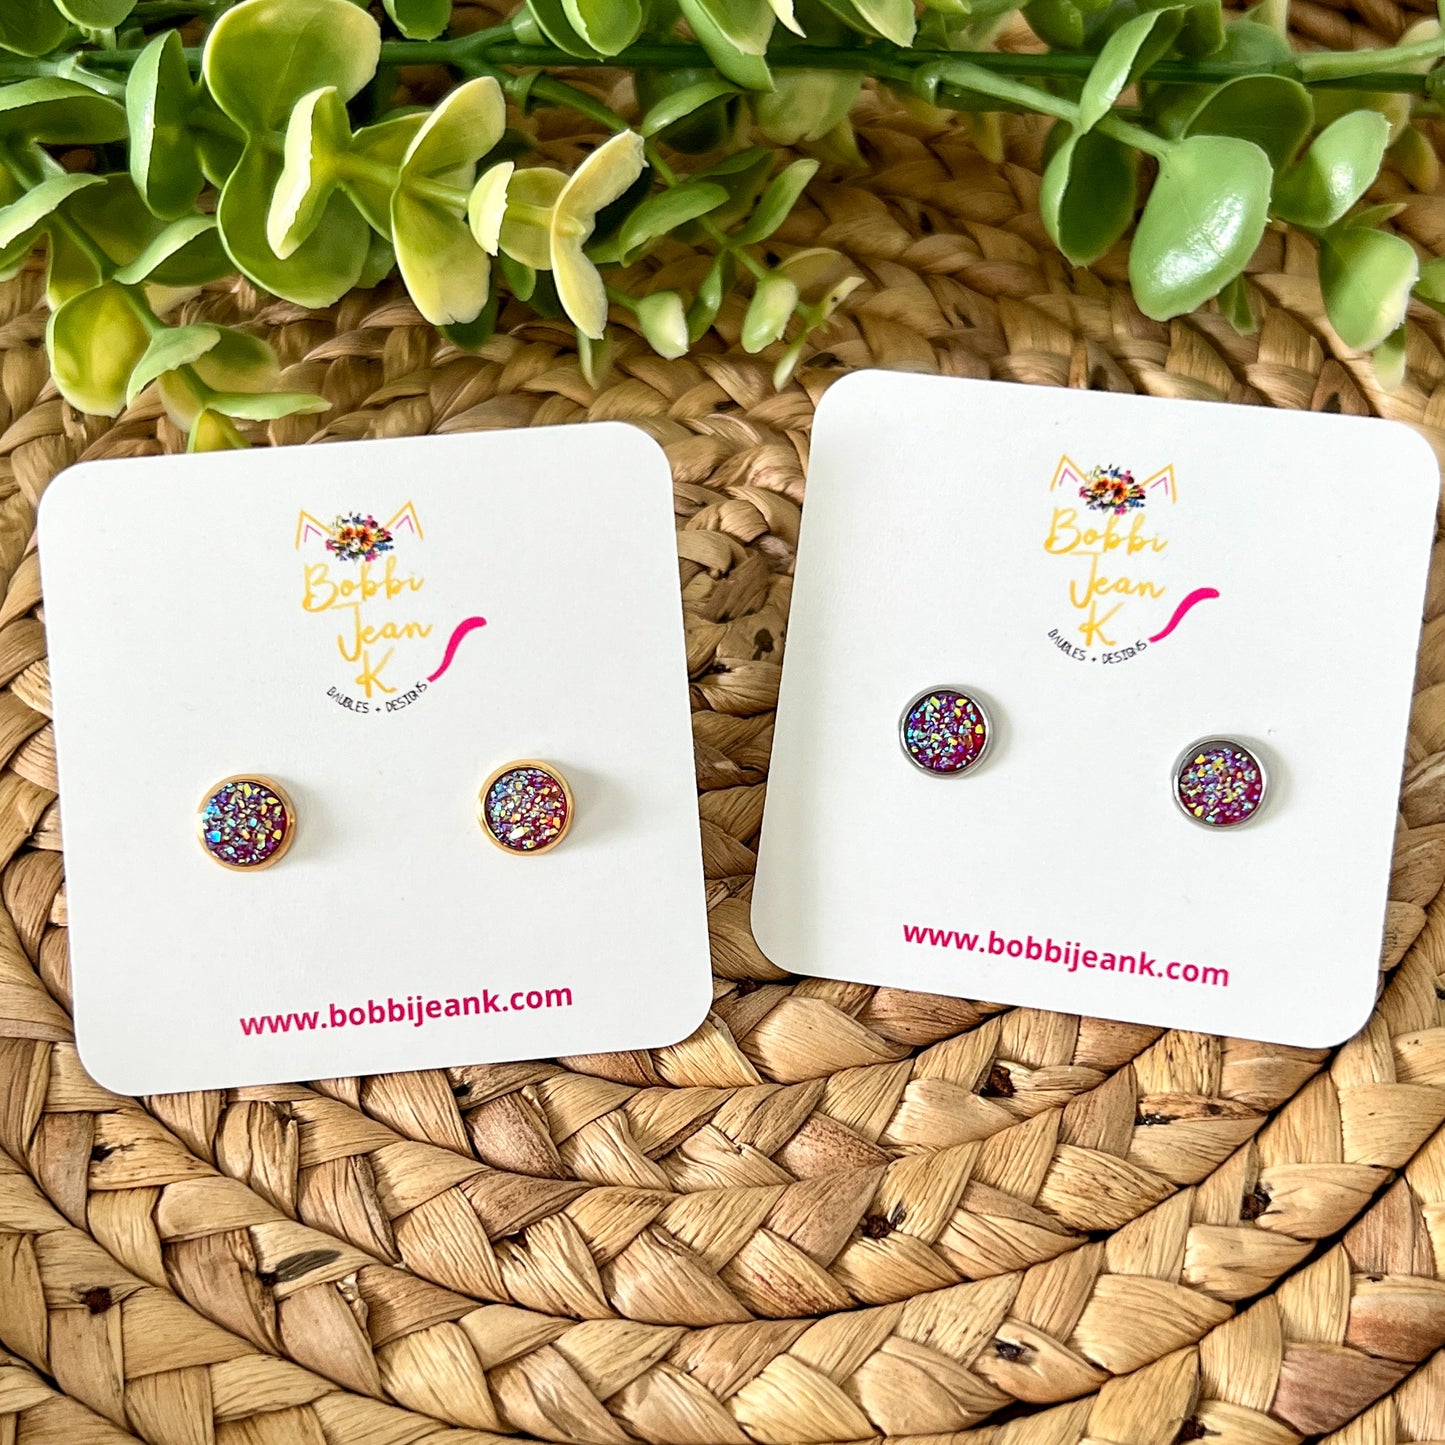 Magenta Faux Druzy Studs 8mm: Choose Silver or Gold Settings